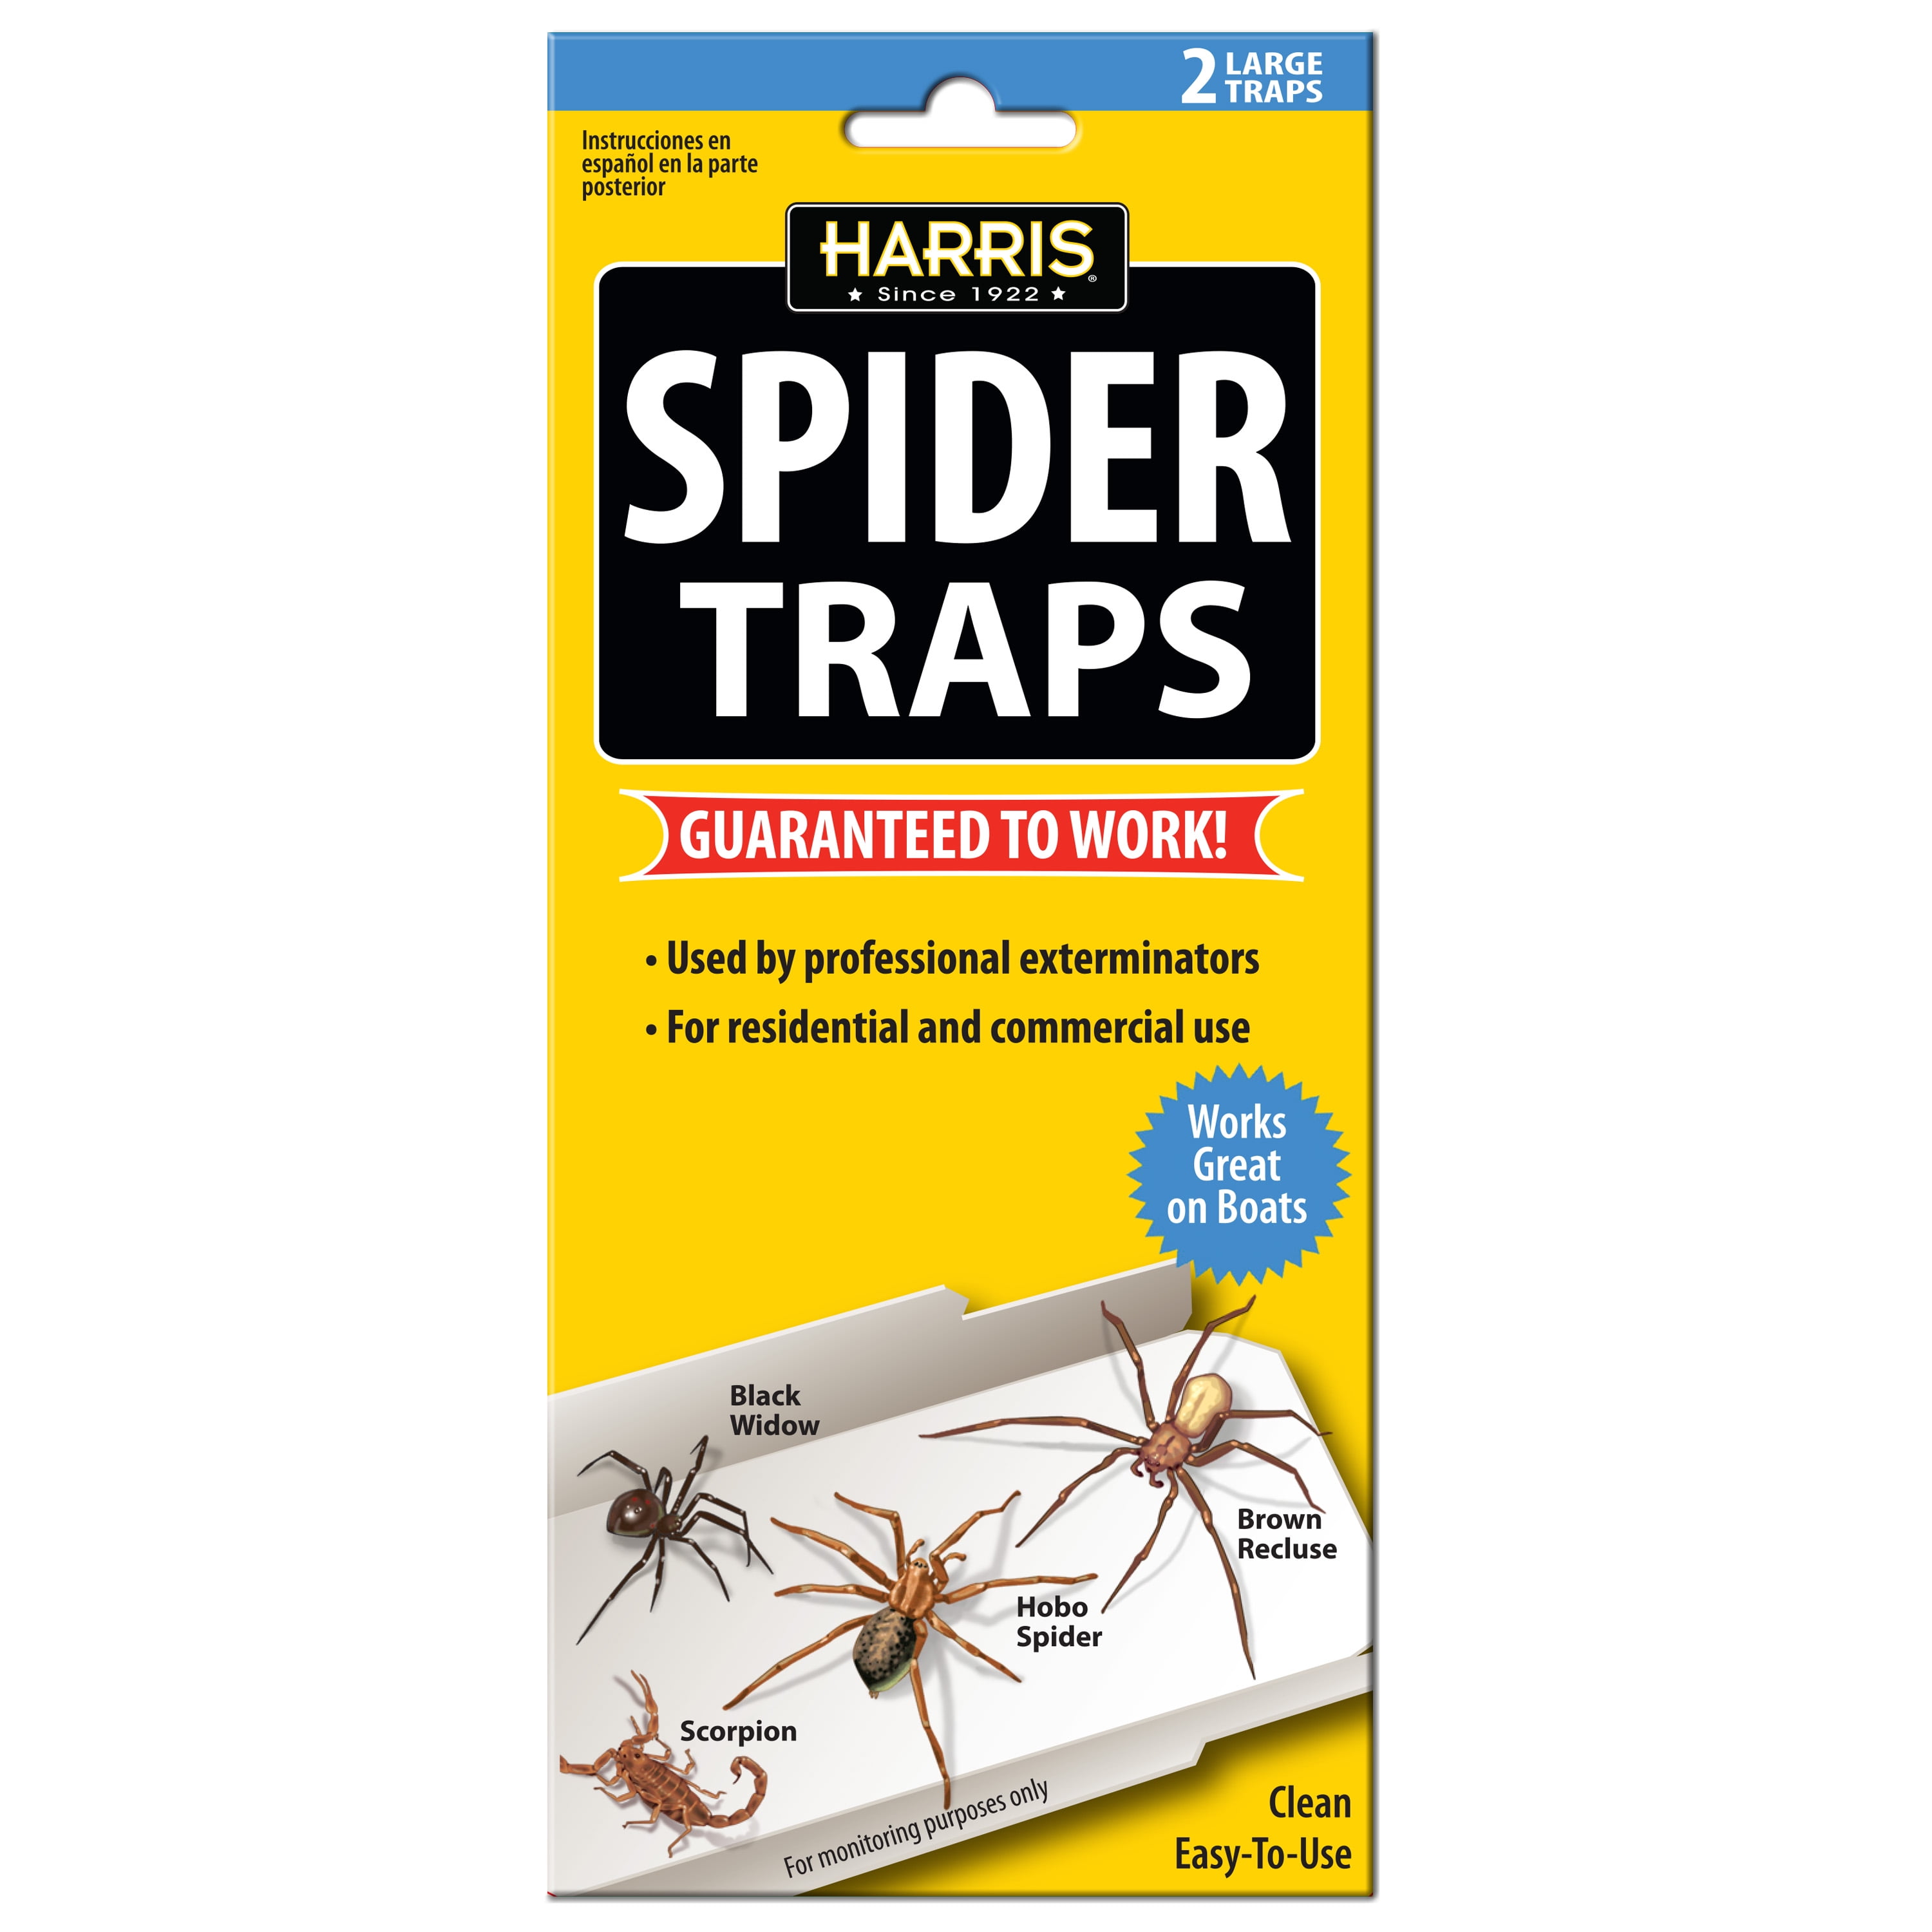 Insect Trap & Monitor, Sticky Glue Boards for Ants & Other Bugs, Non Toxic,  Odorless Pest Control (30-Pack)